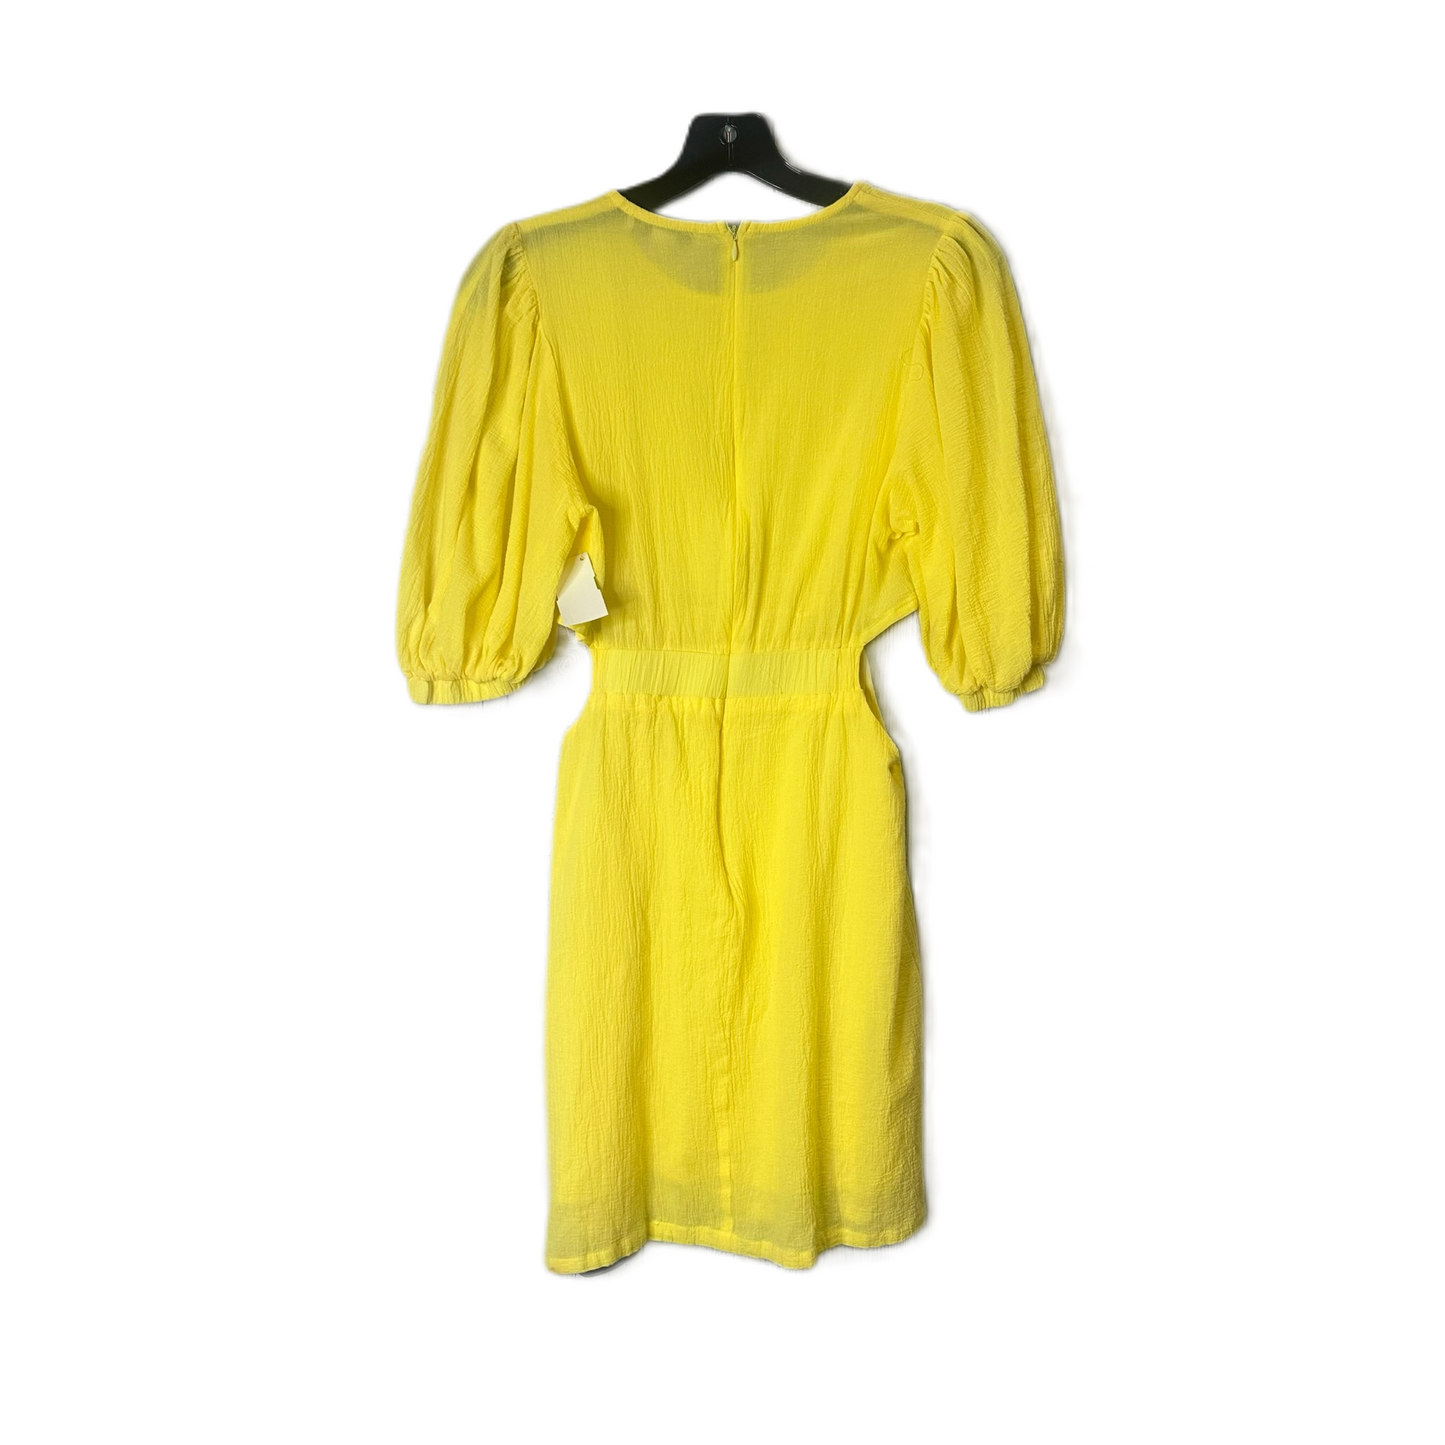 Yellow Dress Casual Short By Hyfve, Size: M